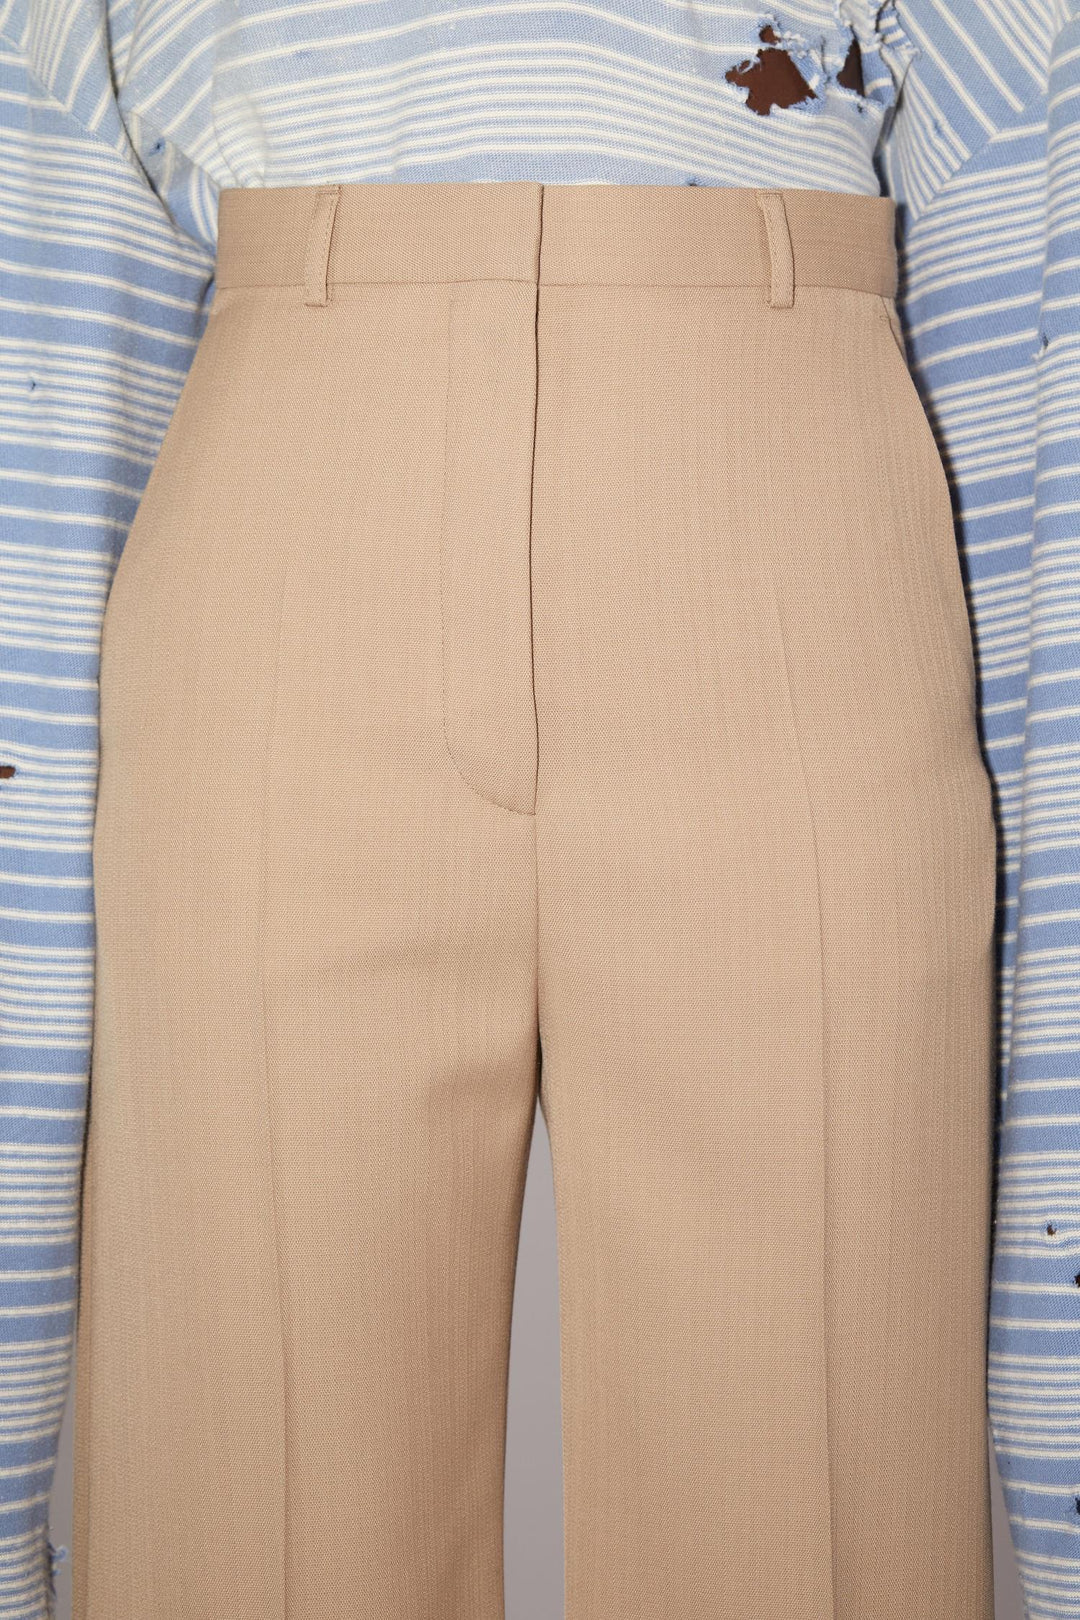 ACNE STUDIOS - TAILORED TROUSERS - BEIGE - Dale